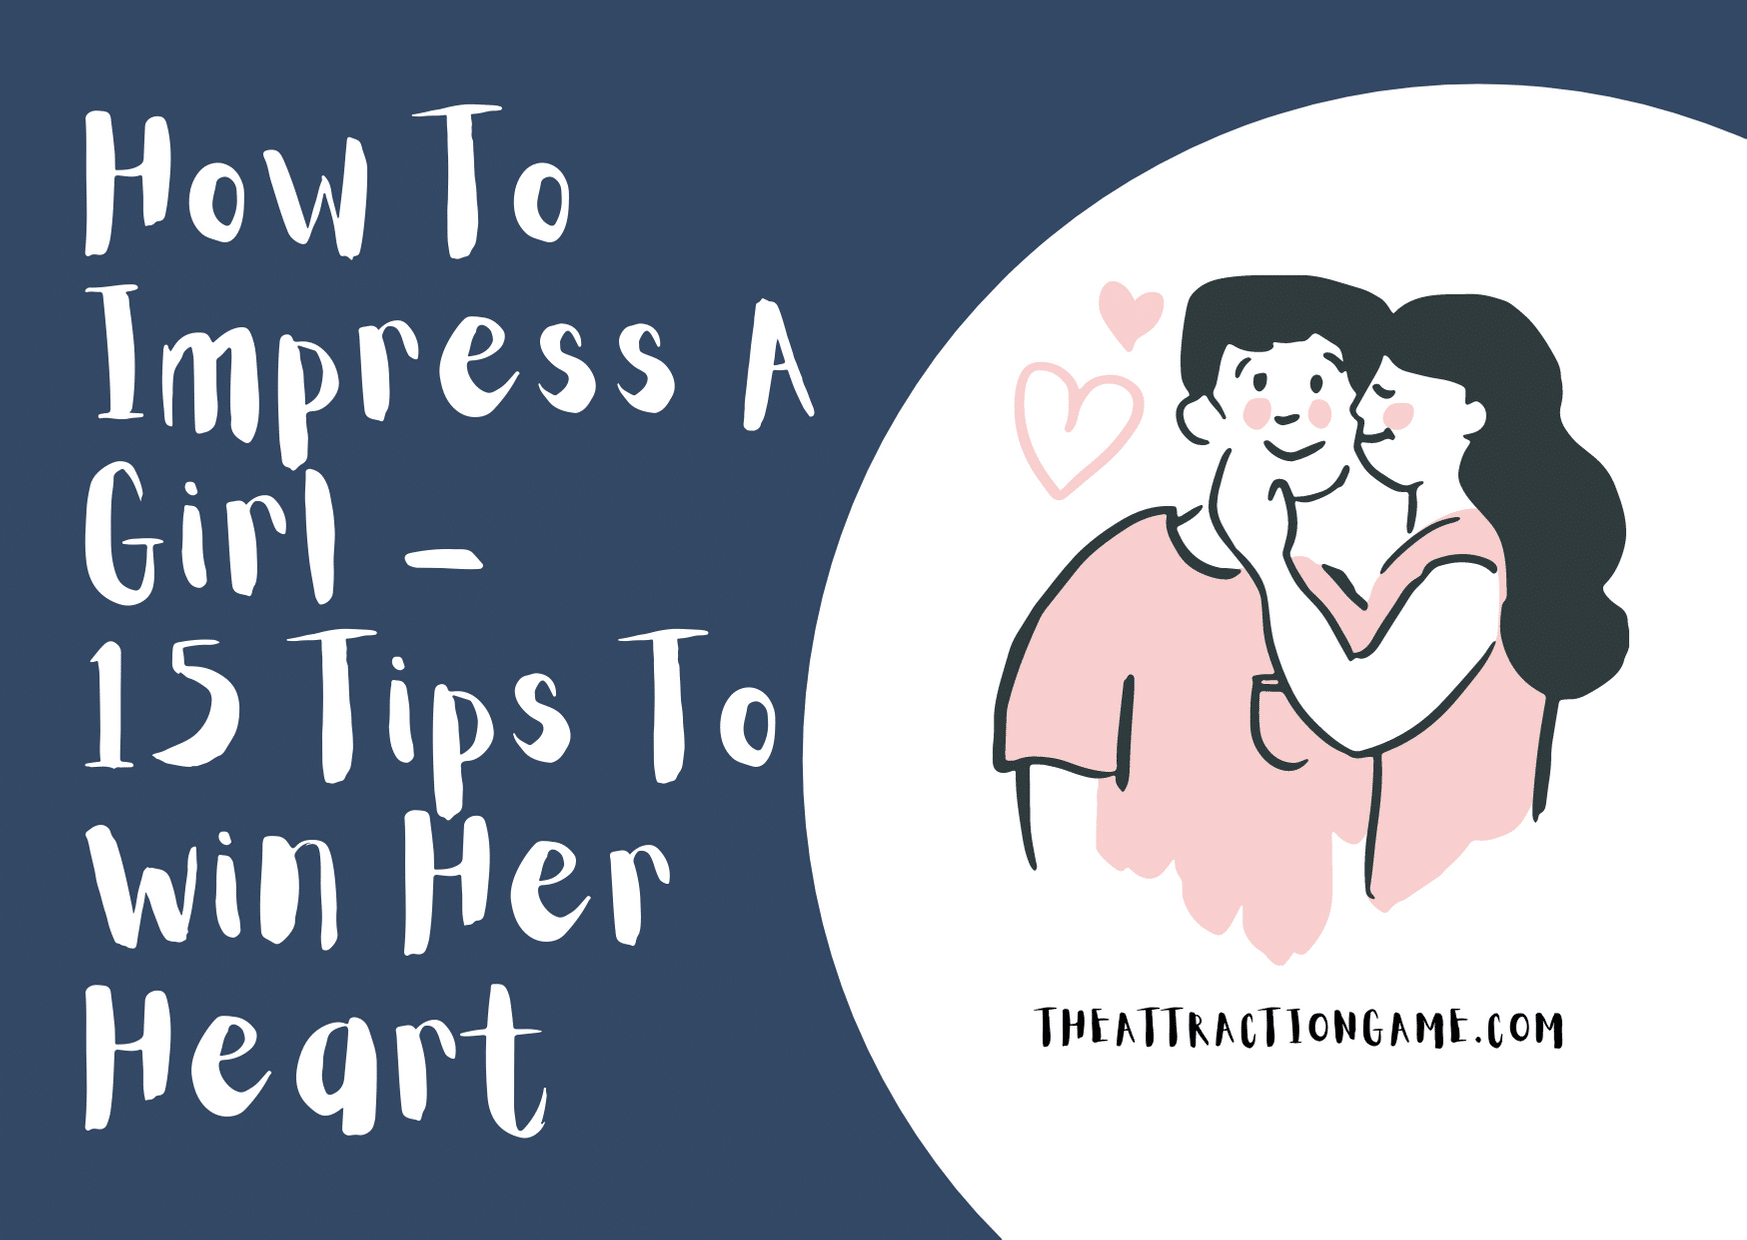 how to impress a girl, impress her, tips on impressing her, impressing a girl, tips on impressing a girl, impress a woman, how to impress a woman